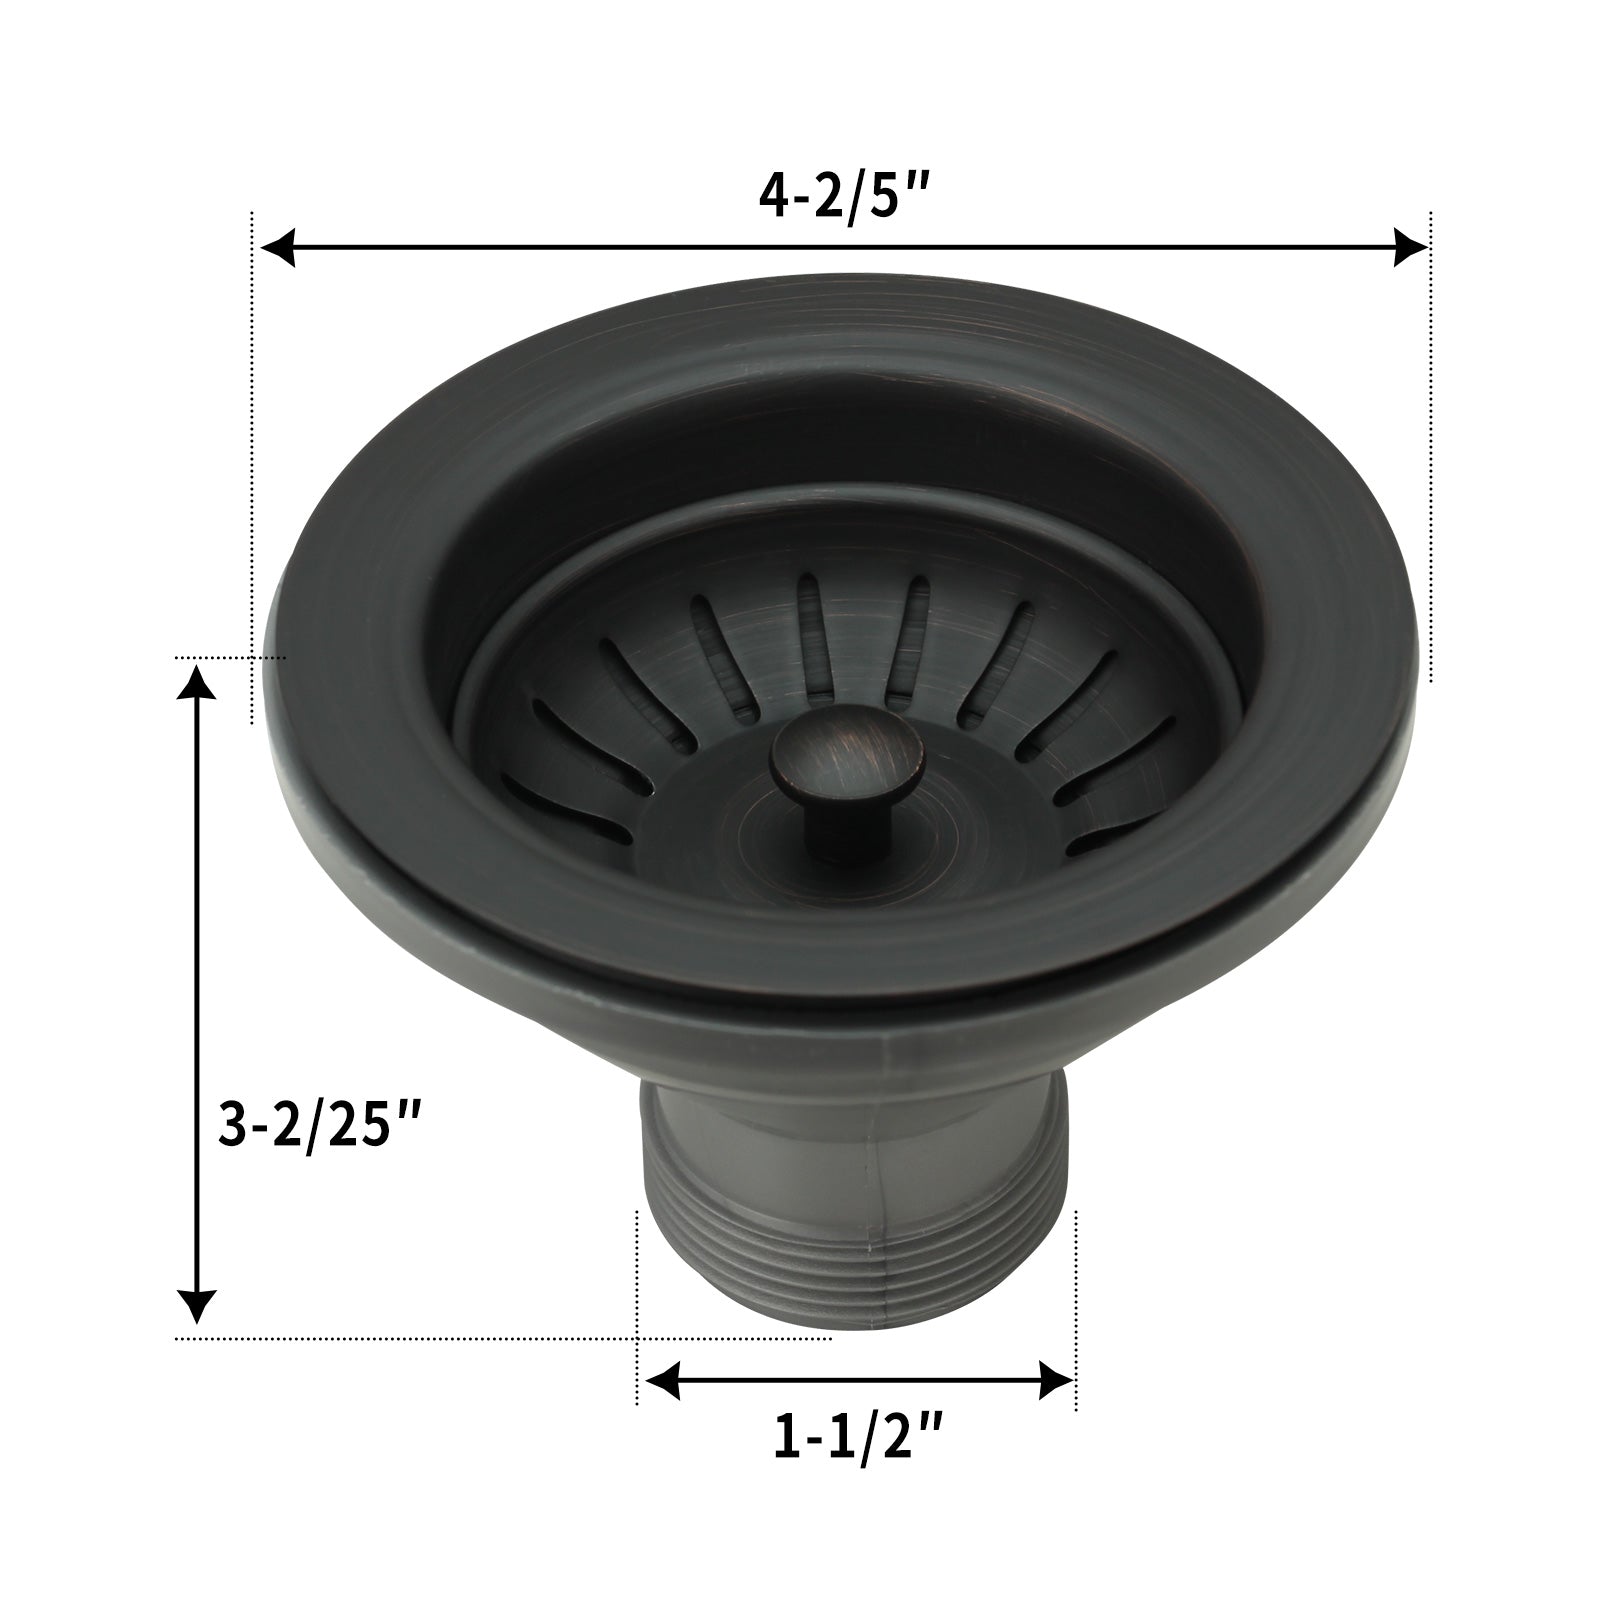 Oil Rubbed Bronze Kitchen Sink Stopper Replacement for 3-1/2 Inch Standard Strainer Drain - AK82102ORB